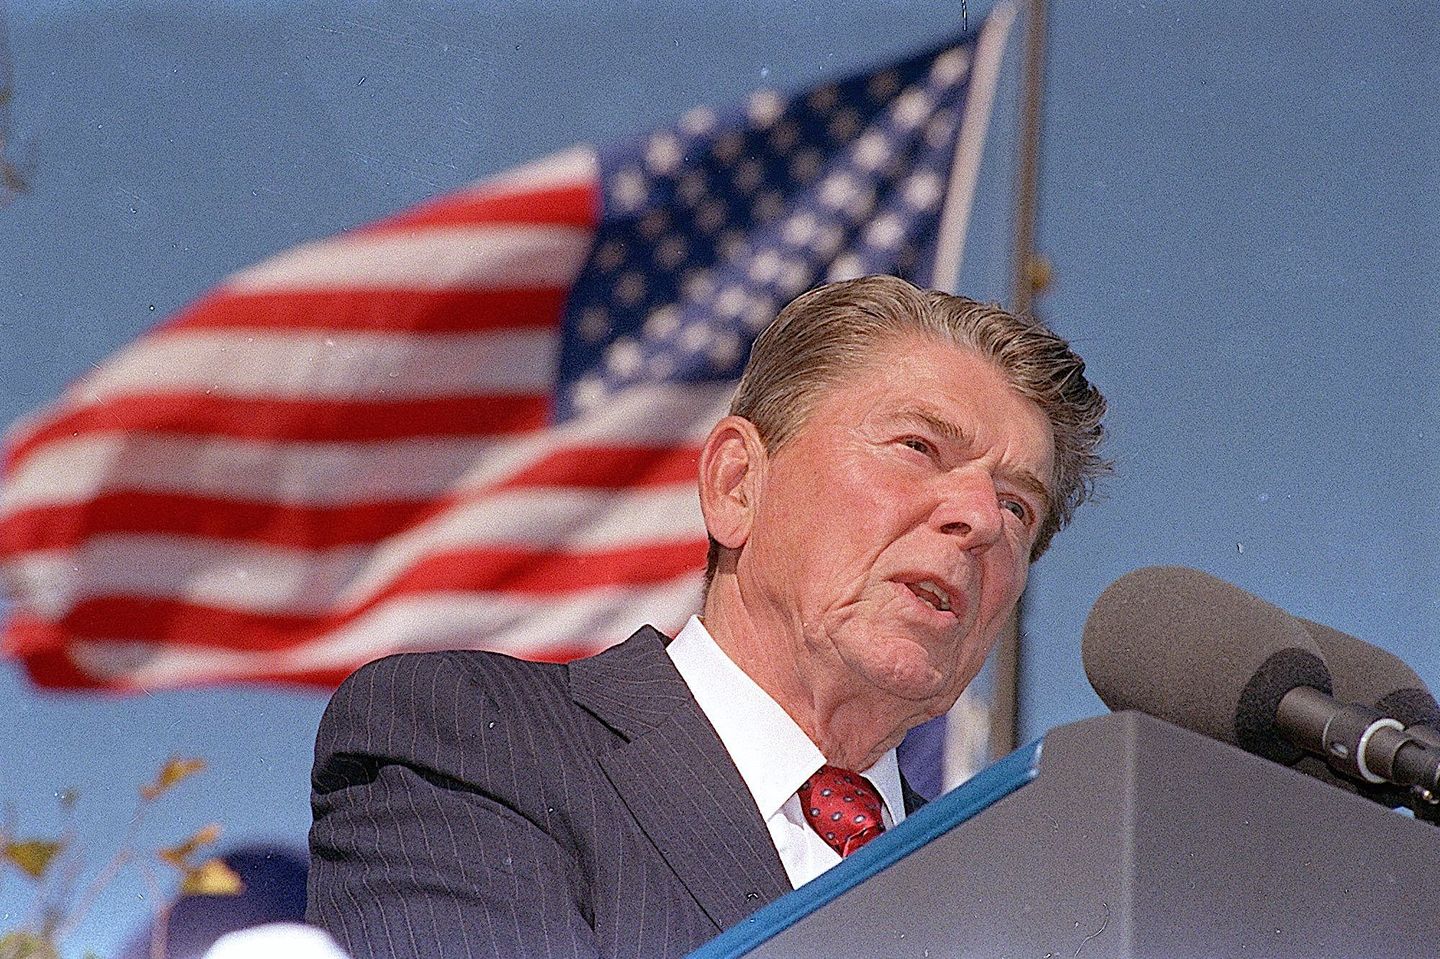 Inside the Beltway: Ronald Reagan's advice on July Fourth